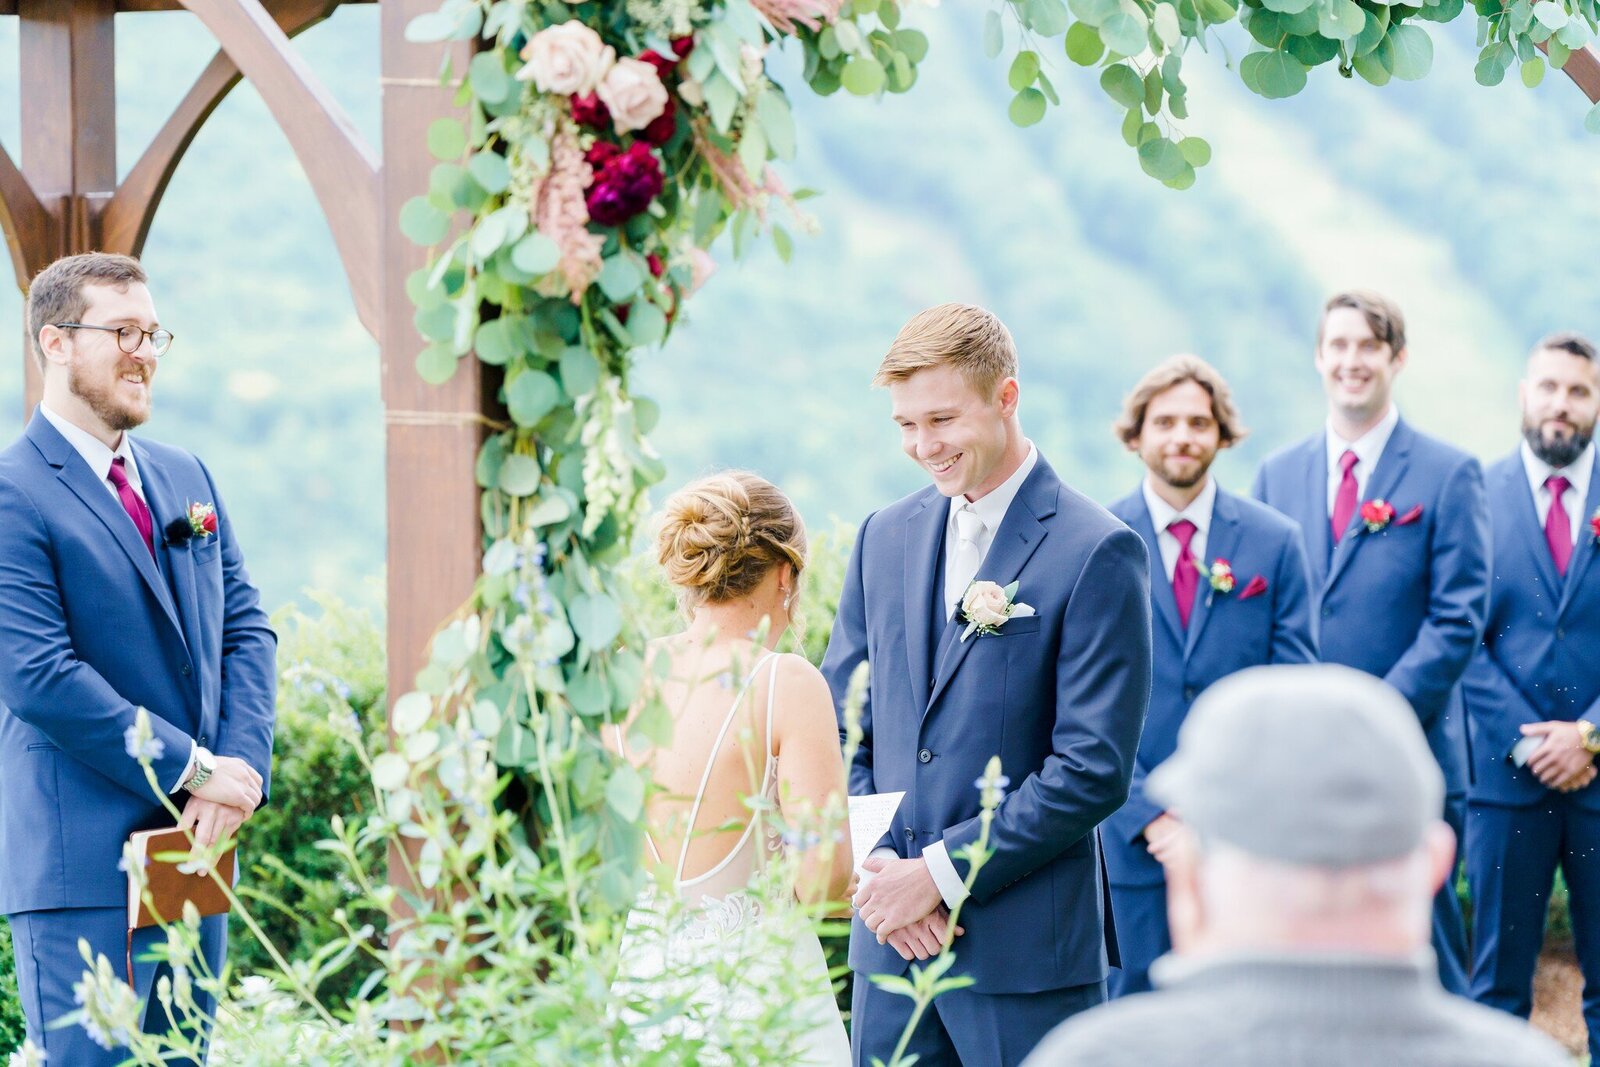 Whimsical wedding ceremony in NH